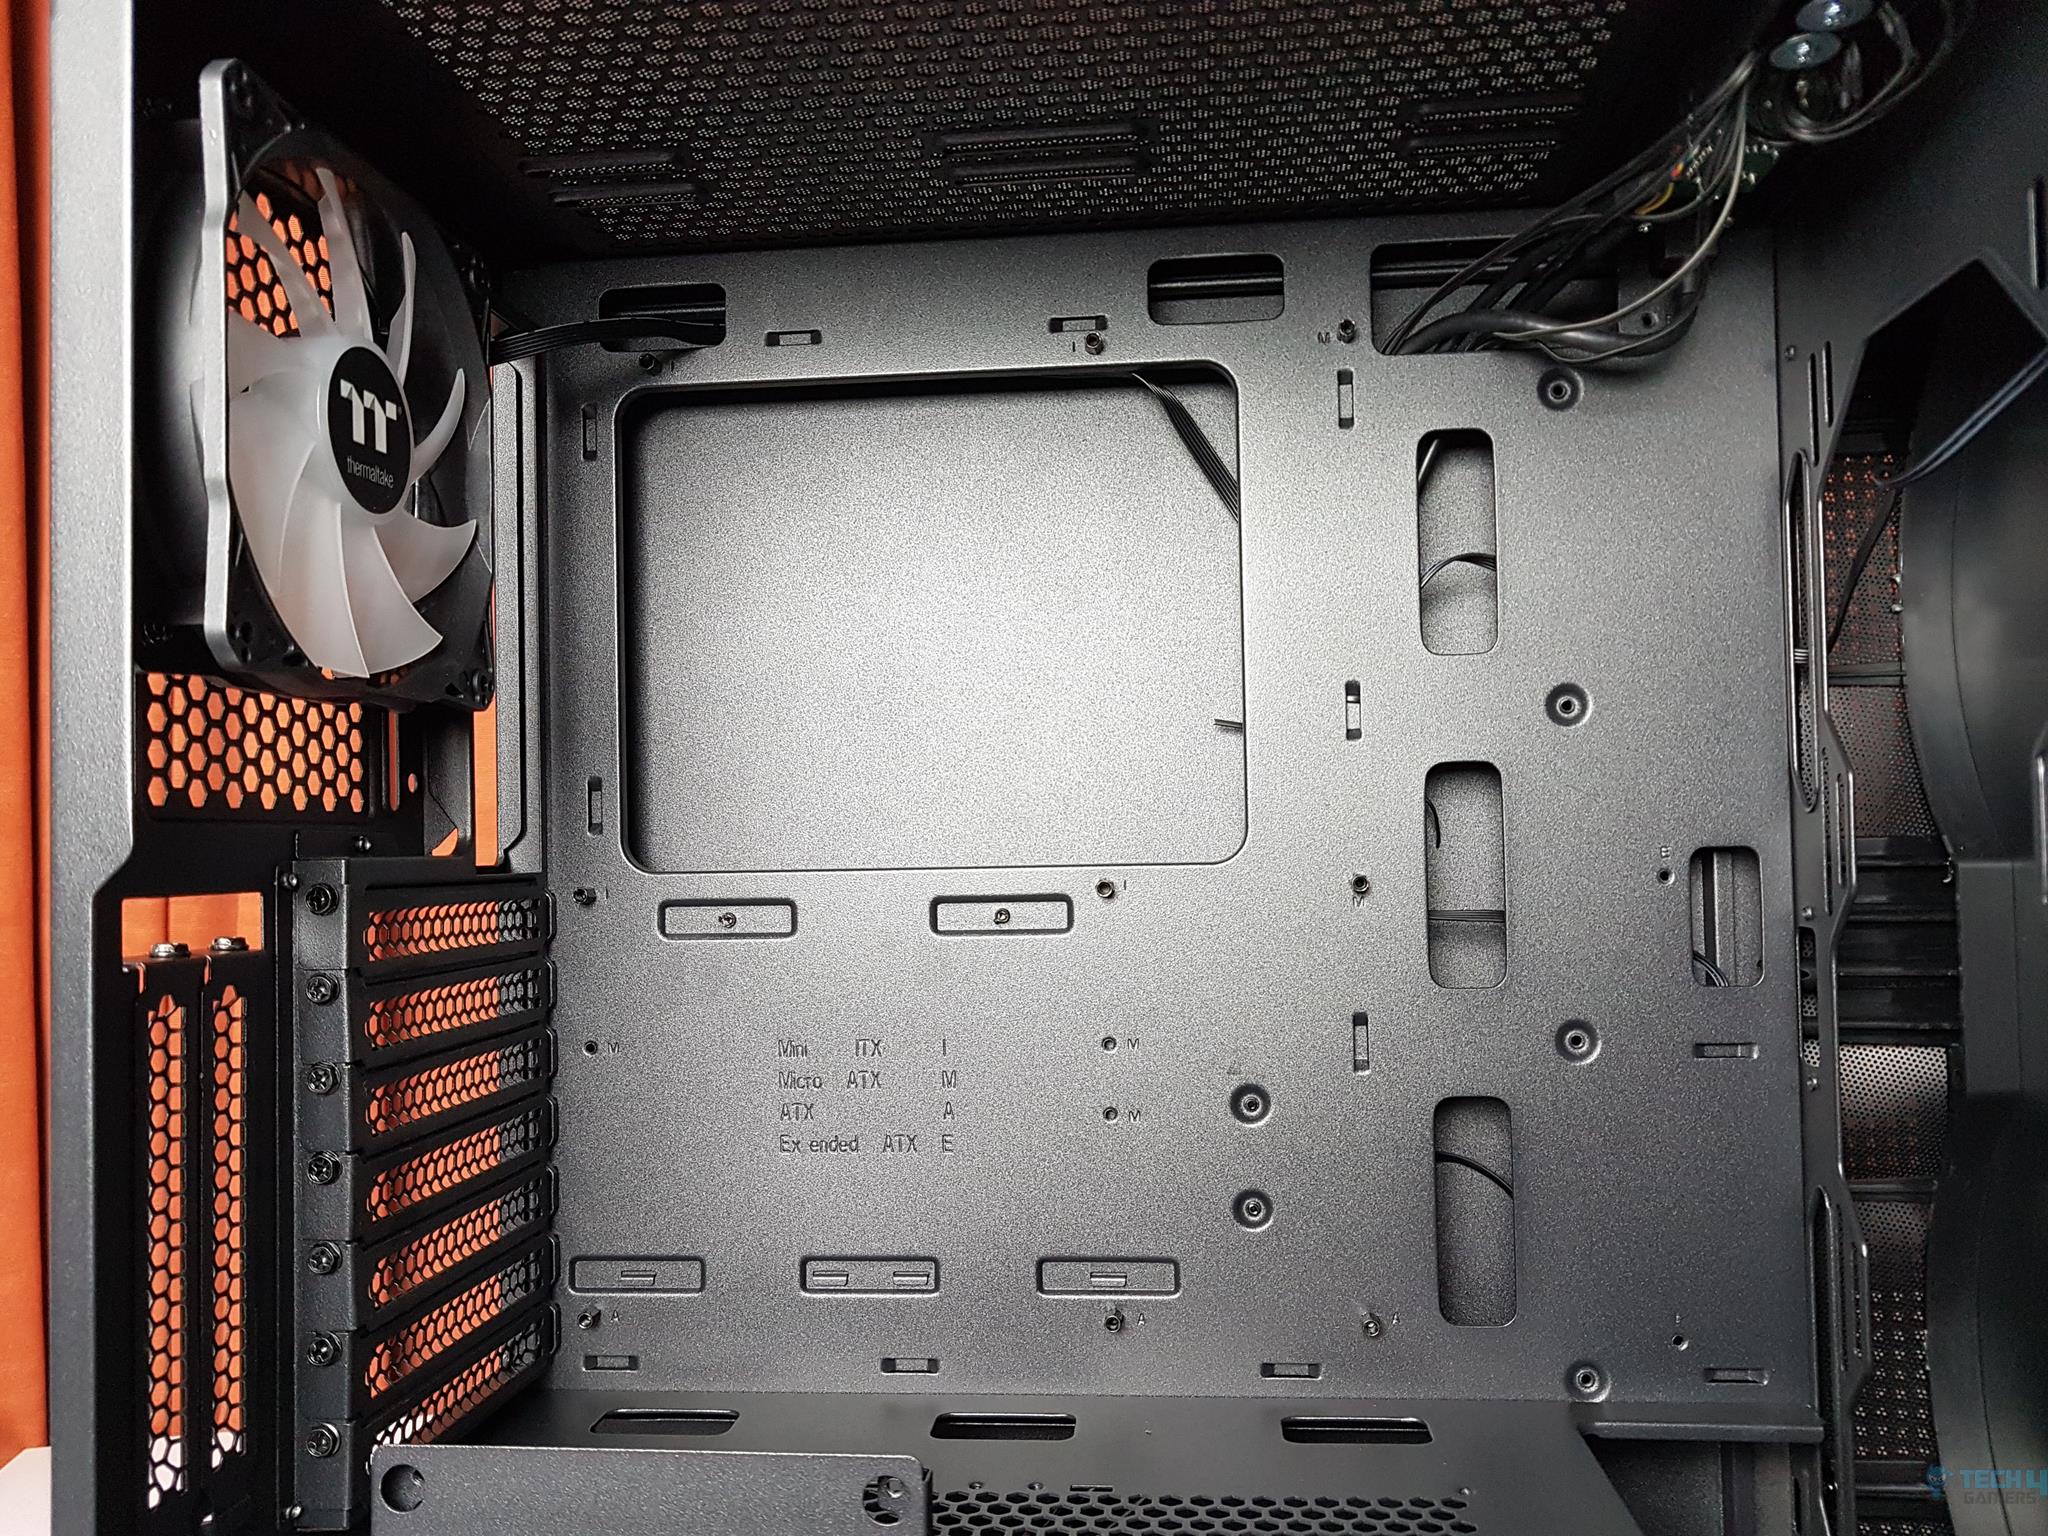 Thermaltake h550 motherboard tray